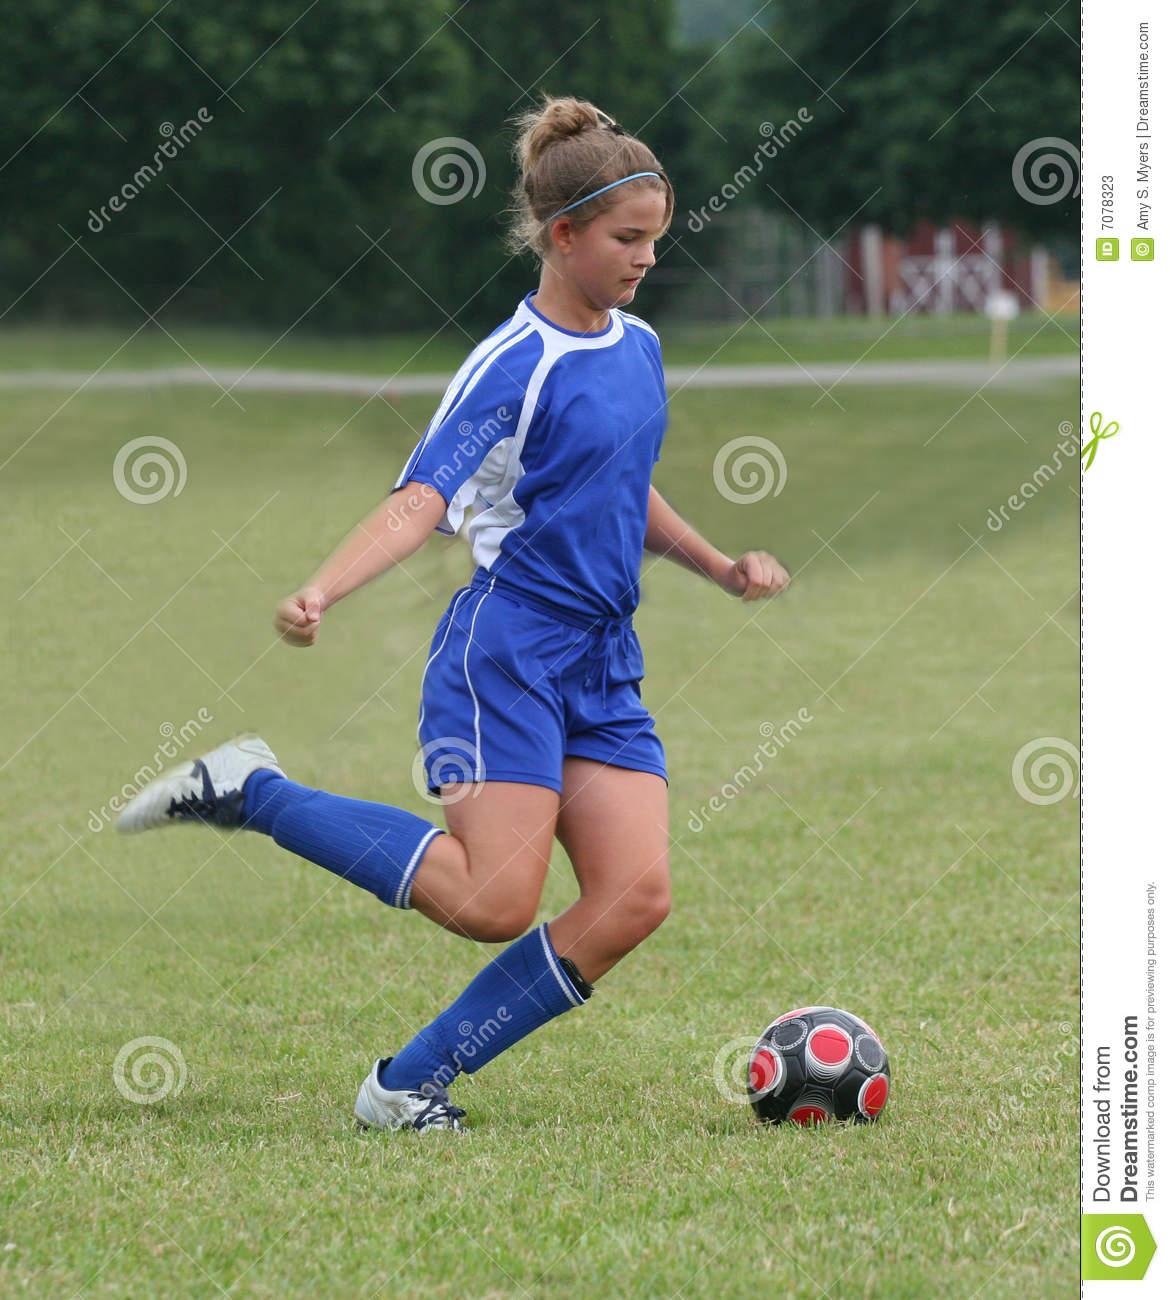 More Similar Stock Images Of   Teen Youth Soccer Action 22